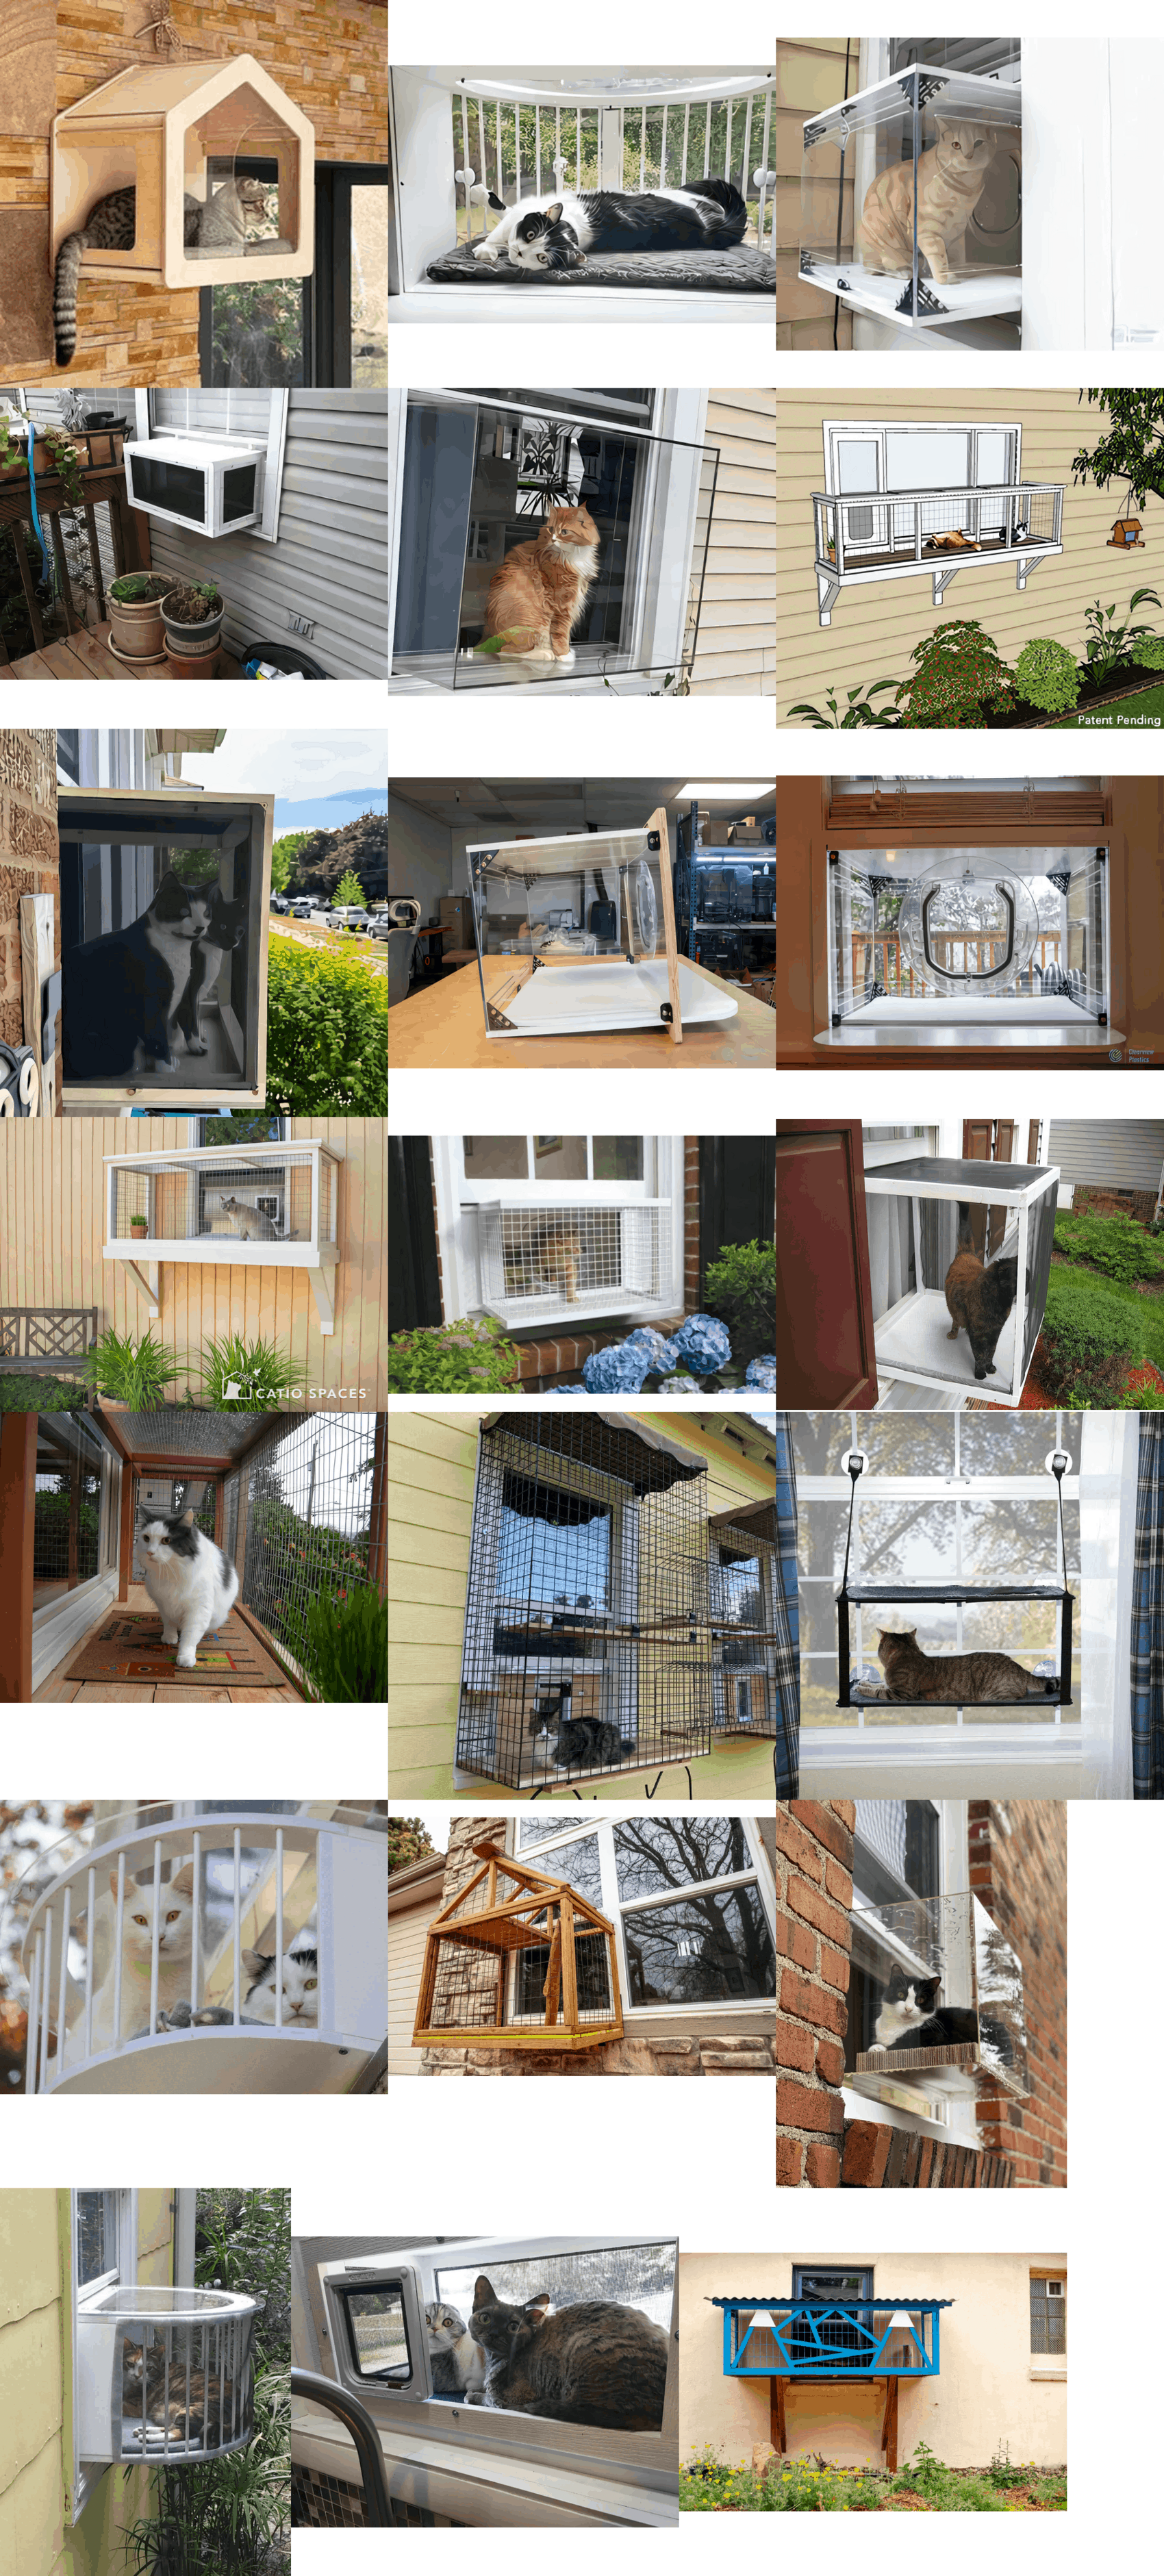 Imagequilt (3×7 grid) of 21 cat window boxes selected from Google Images search for “cat window box”, showing general vulnerability of design in exposing cats to the outside.